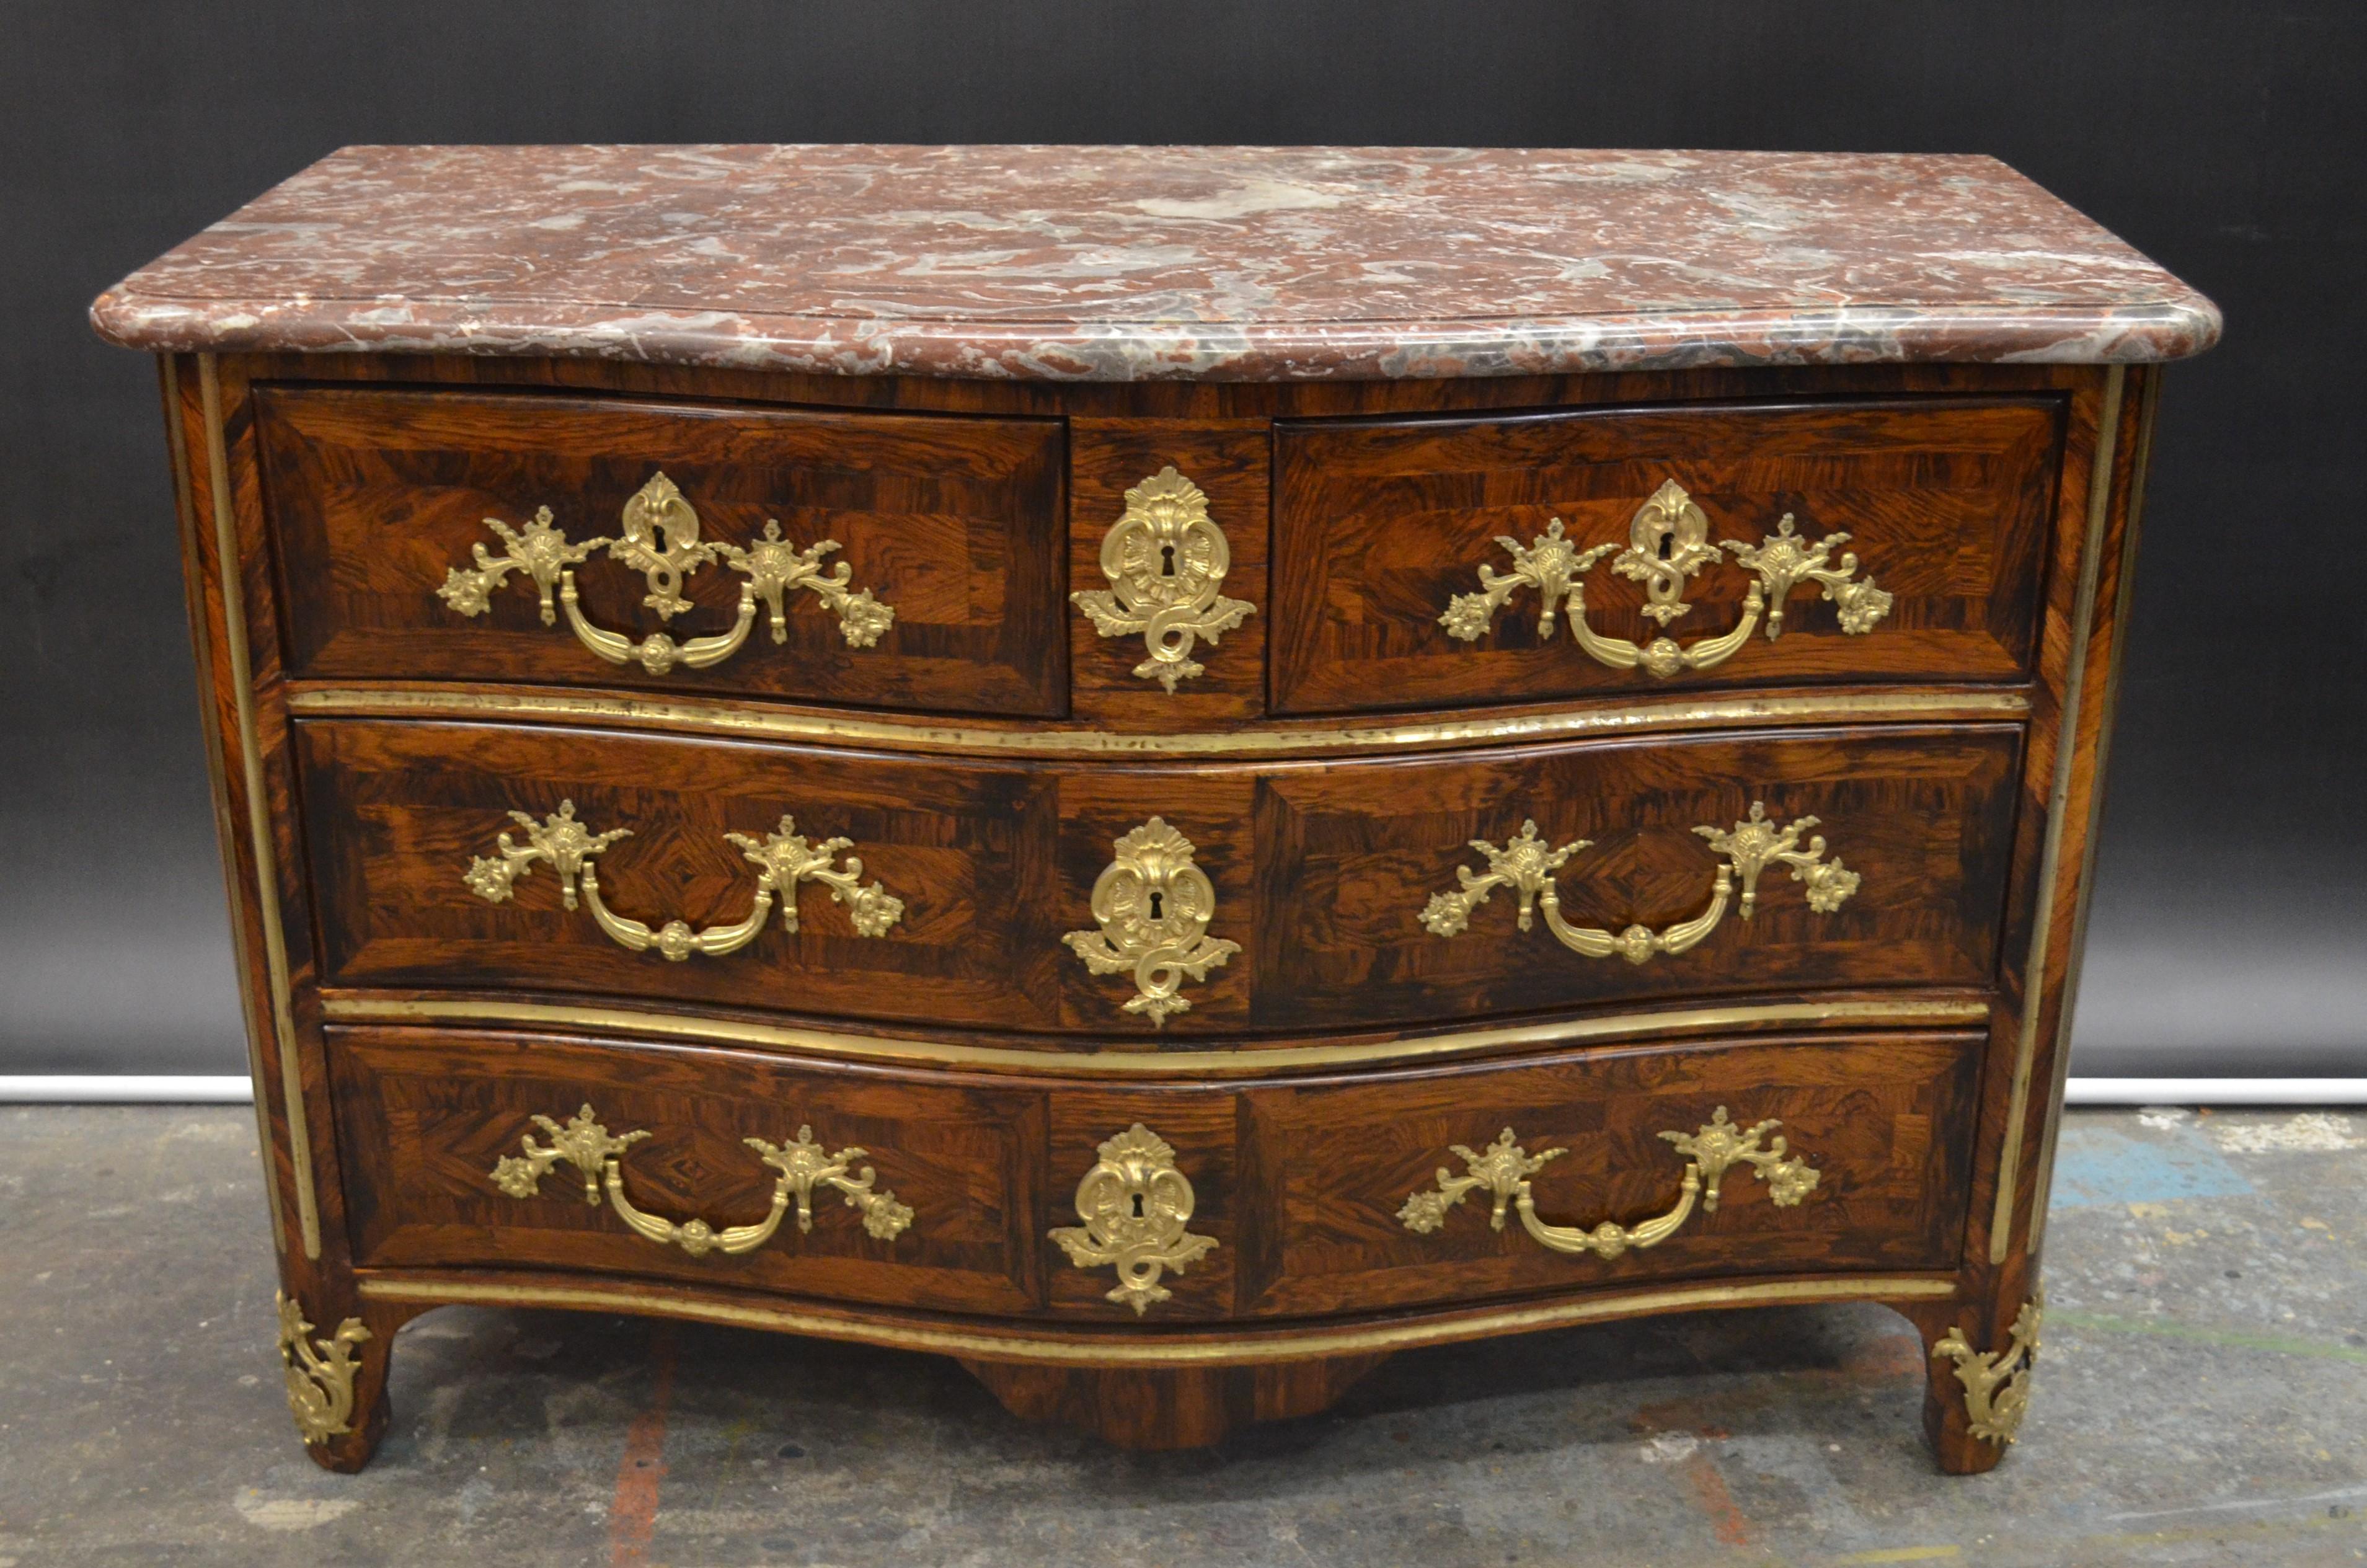 This impressive, 18th century, French Régence Ormolu-Mounted Rosewood & Kingwood veneered Commode retains it's original hand chiseled serpentine front rouge marble-top. This Régence Commode has five drawers with herringbone, and crossbanded inlaid